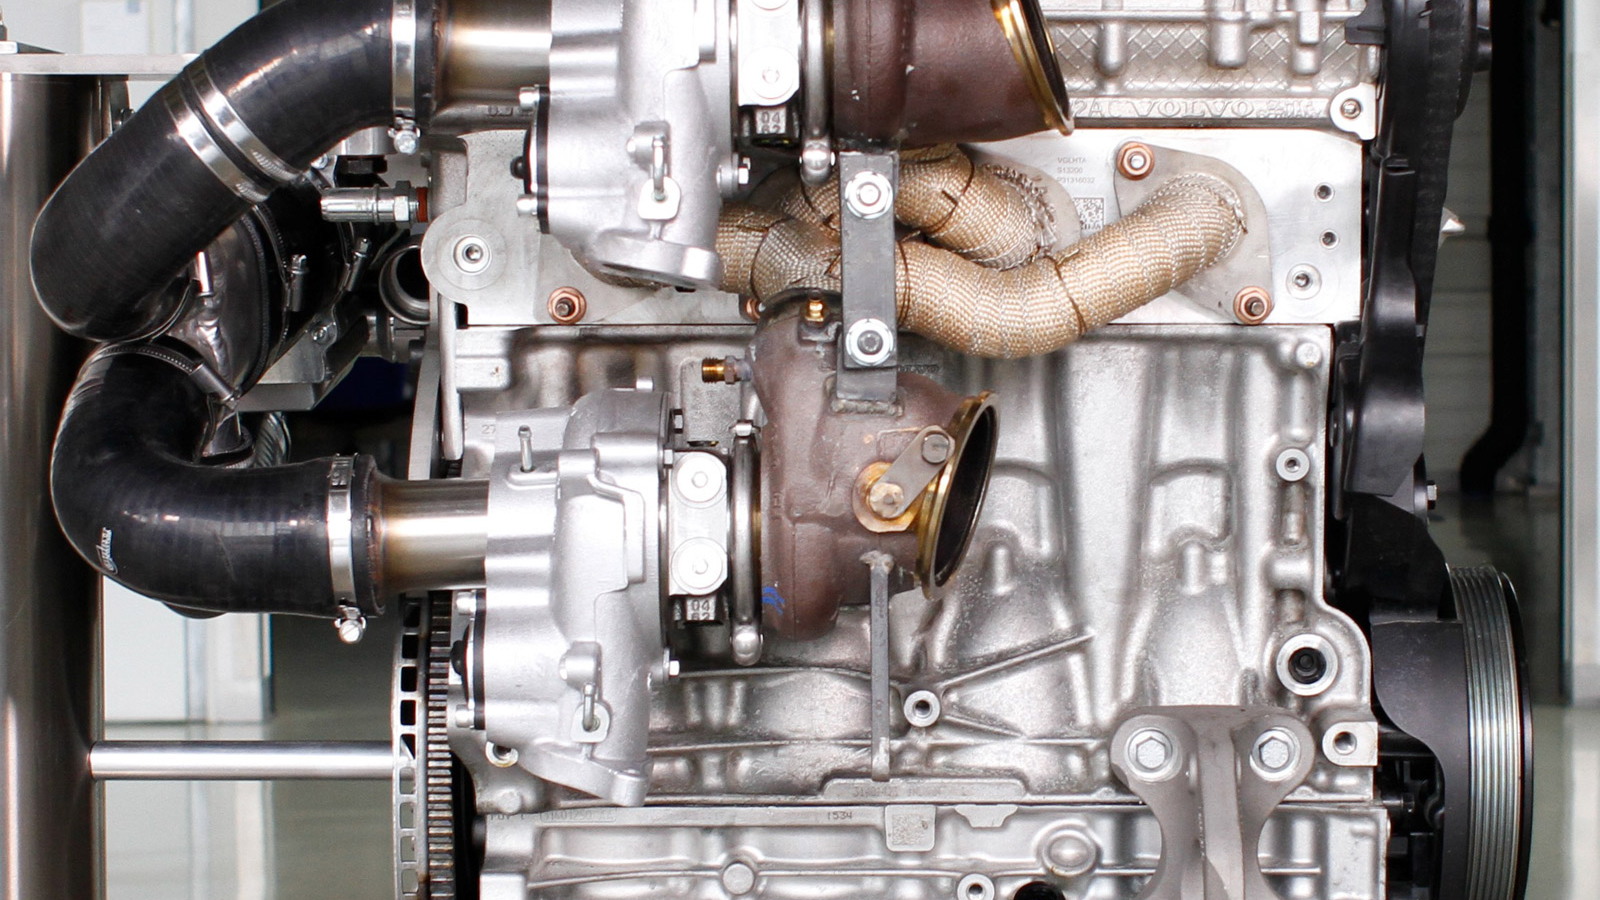 Volvo Drive-E engine with electrically-driven turbocharger